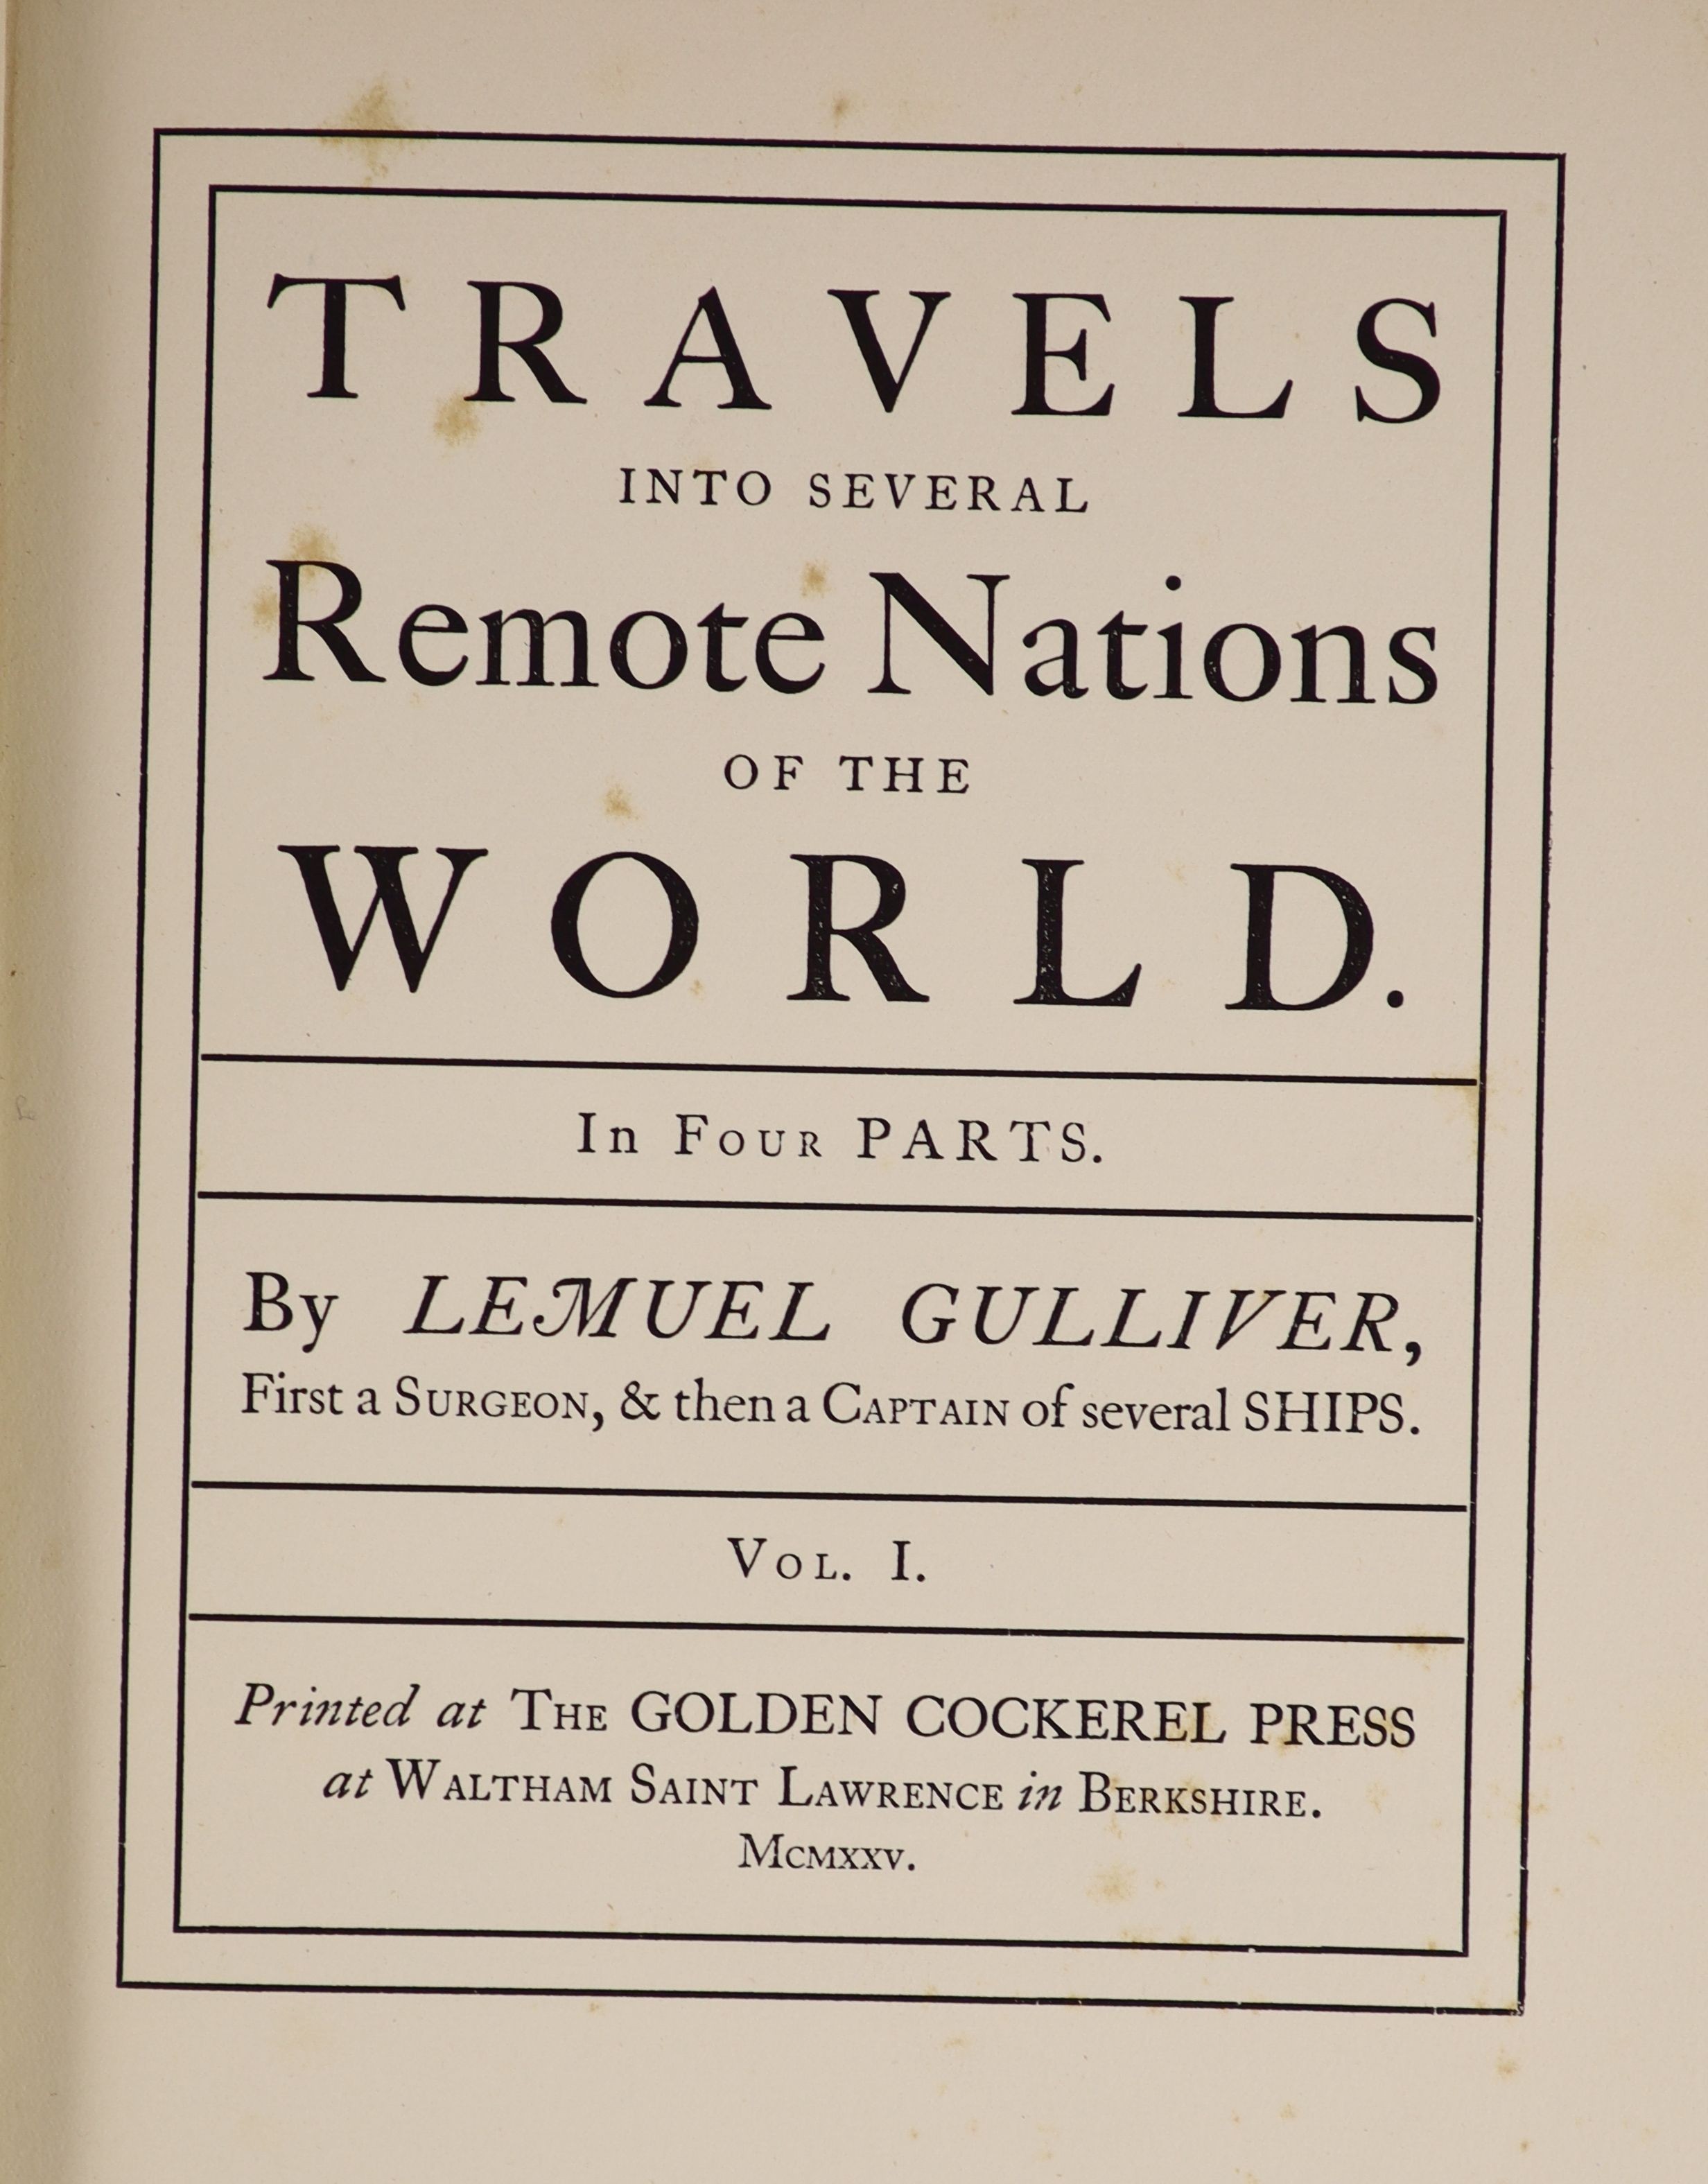 Golden Cockerel Press-Waltham Saint Lawrence, Berkshire - Swift, Jonathan - Gulliver’s Travels ‘’Travels into Several Remote Nations’’, 2 vols, 4to, original half white buckram, number 414 of 480, illustrated with 42 woo